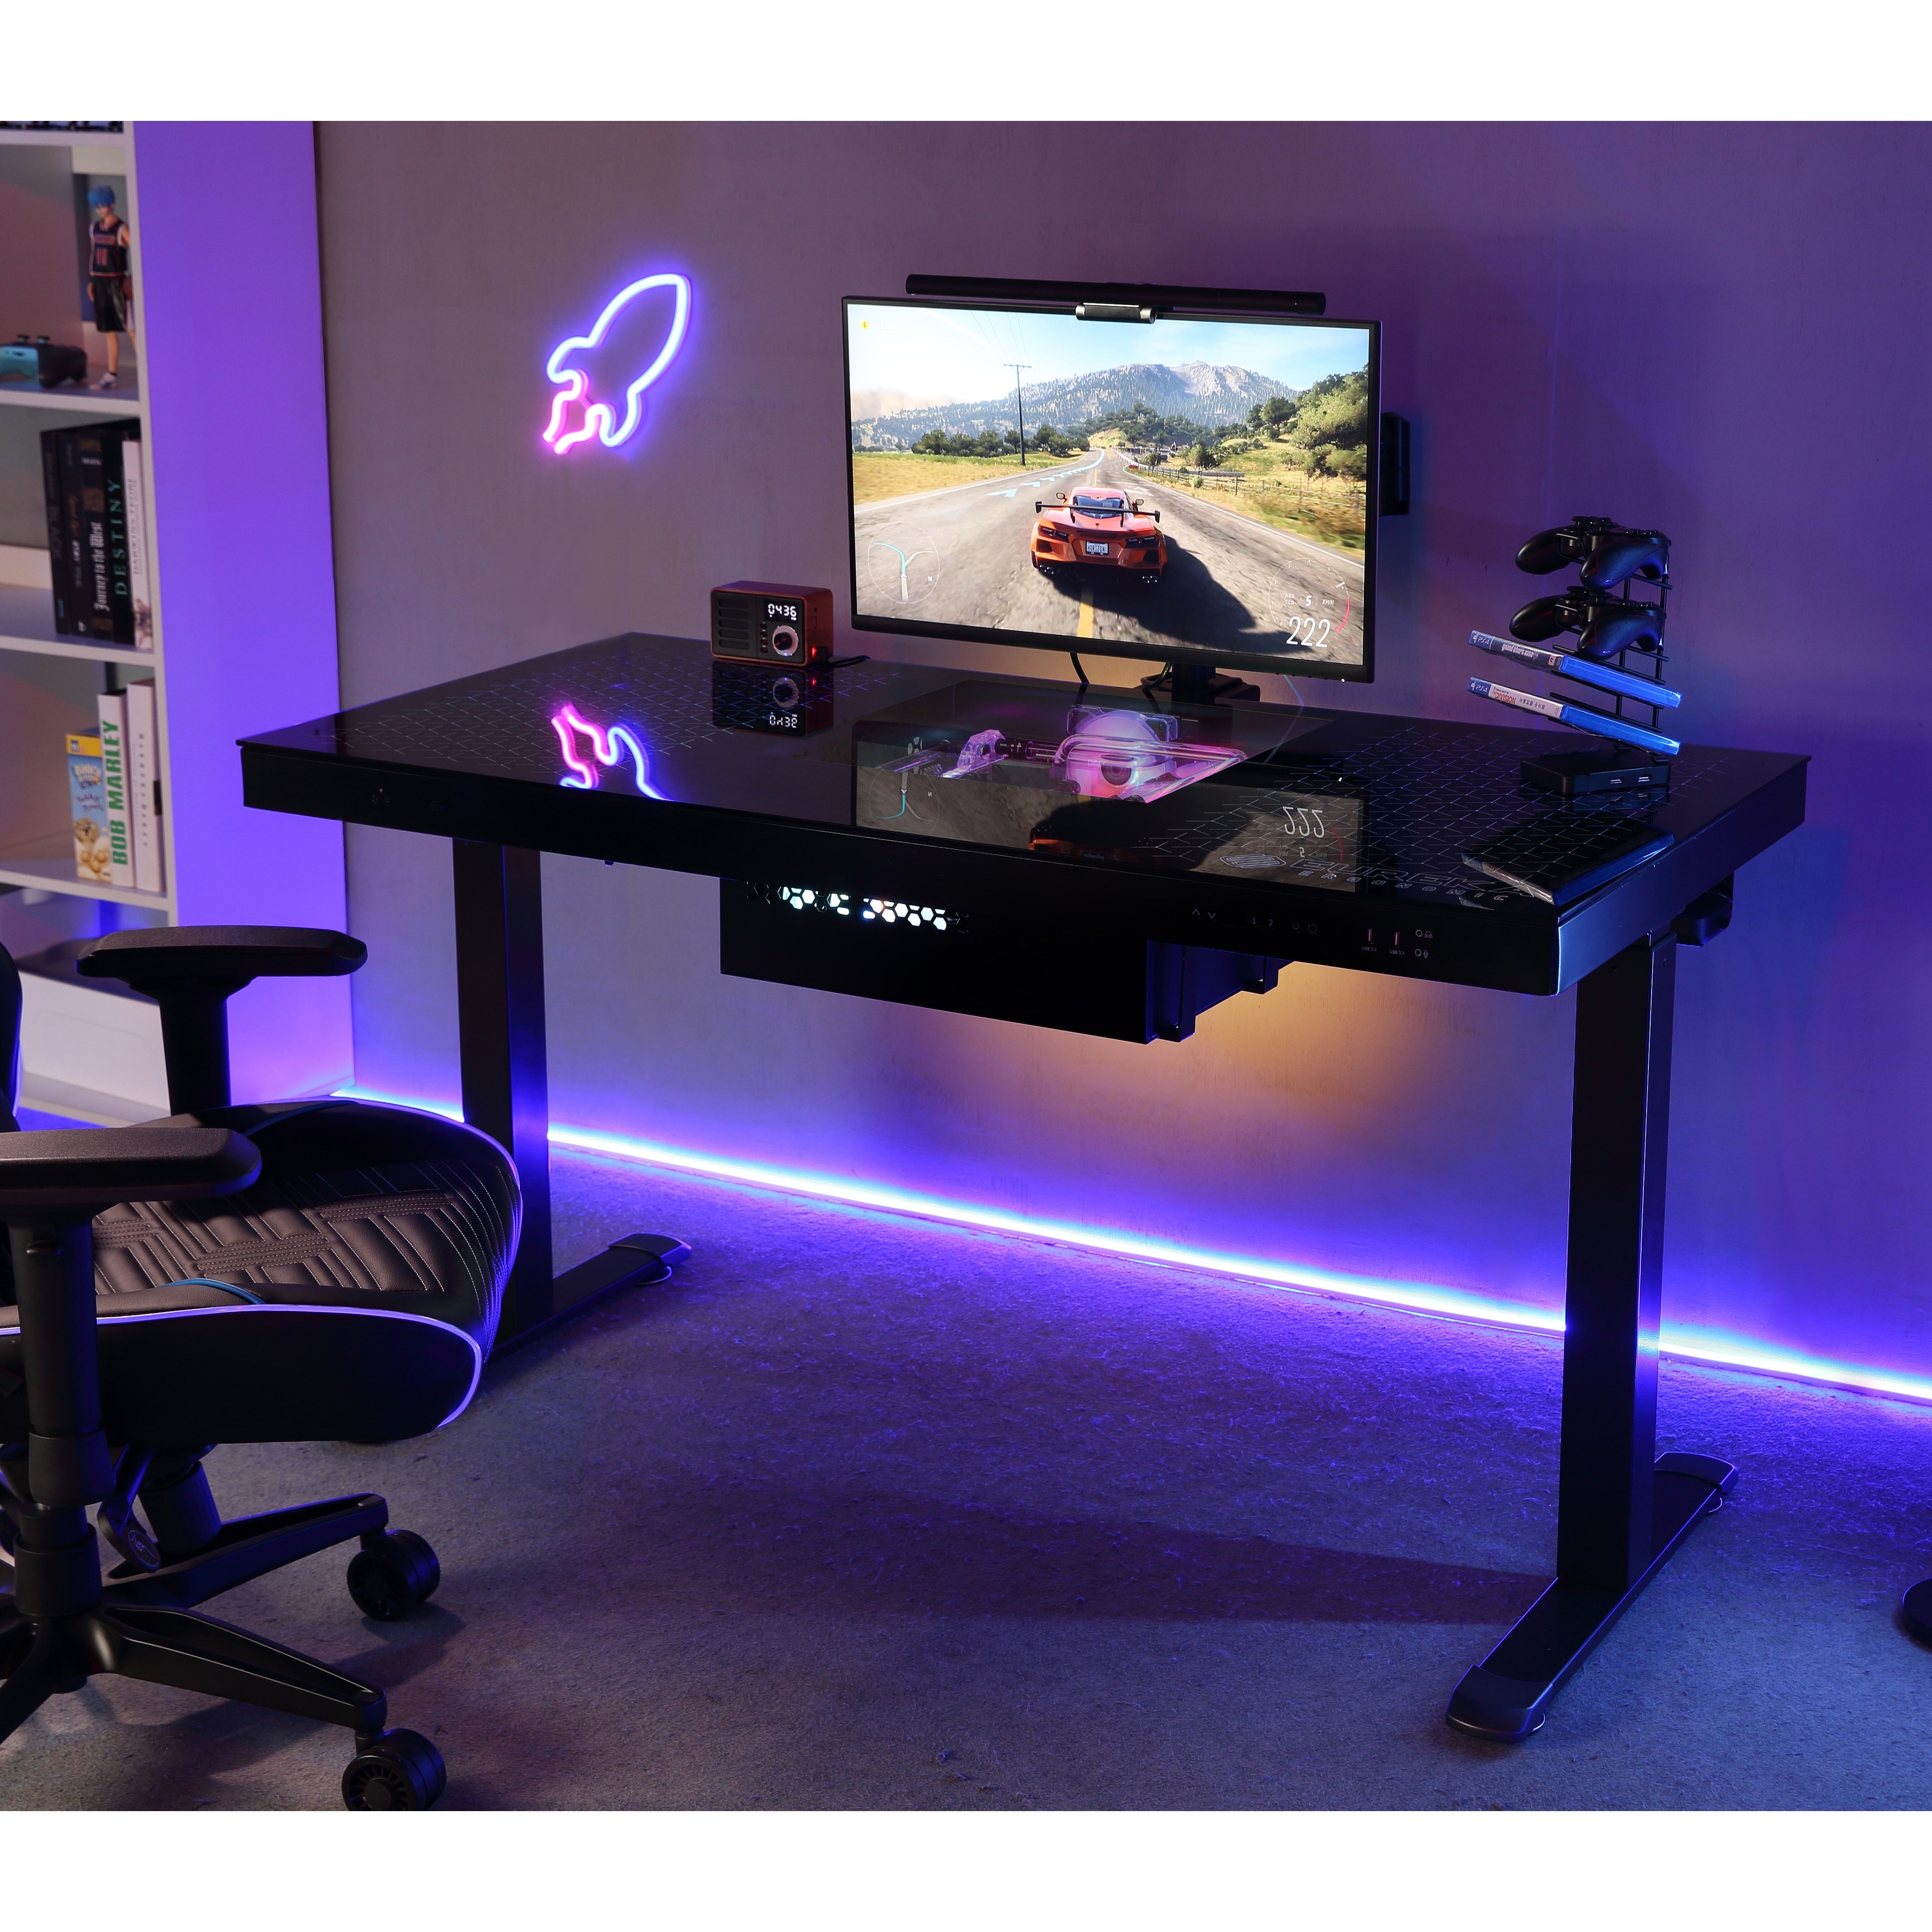 https://ak1.ostkcdn.com/images/products/is/images/direct/68329ab573204981ac950f76ca18ad8128690c19/Eureka-Ergonomic-RGB-Gaming-Desk-Built-in-PC-Case%2C-55%22-Glass-Electric-Standing-Desk.jpg